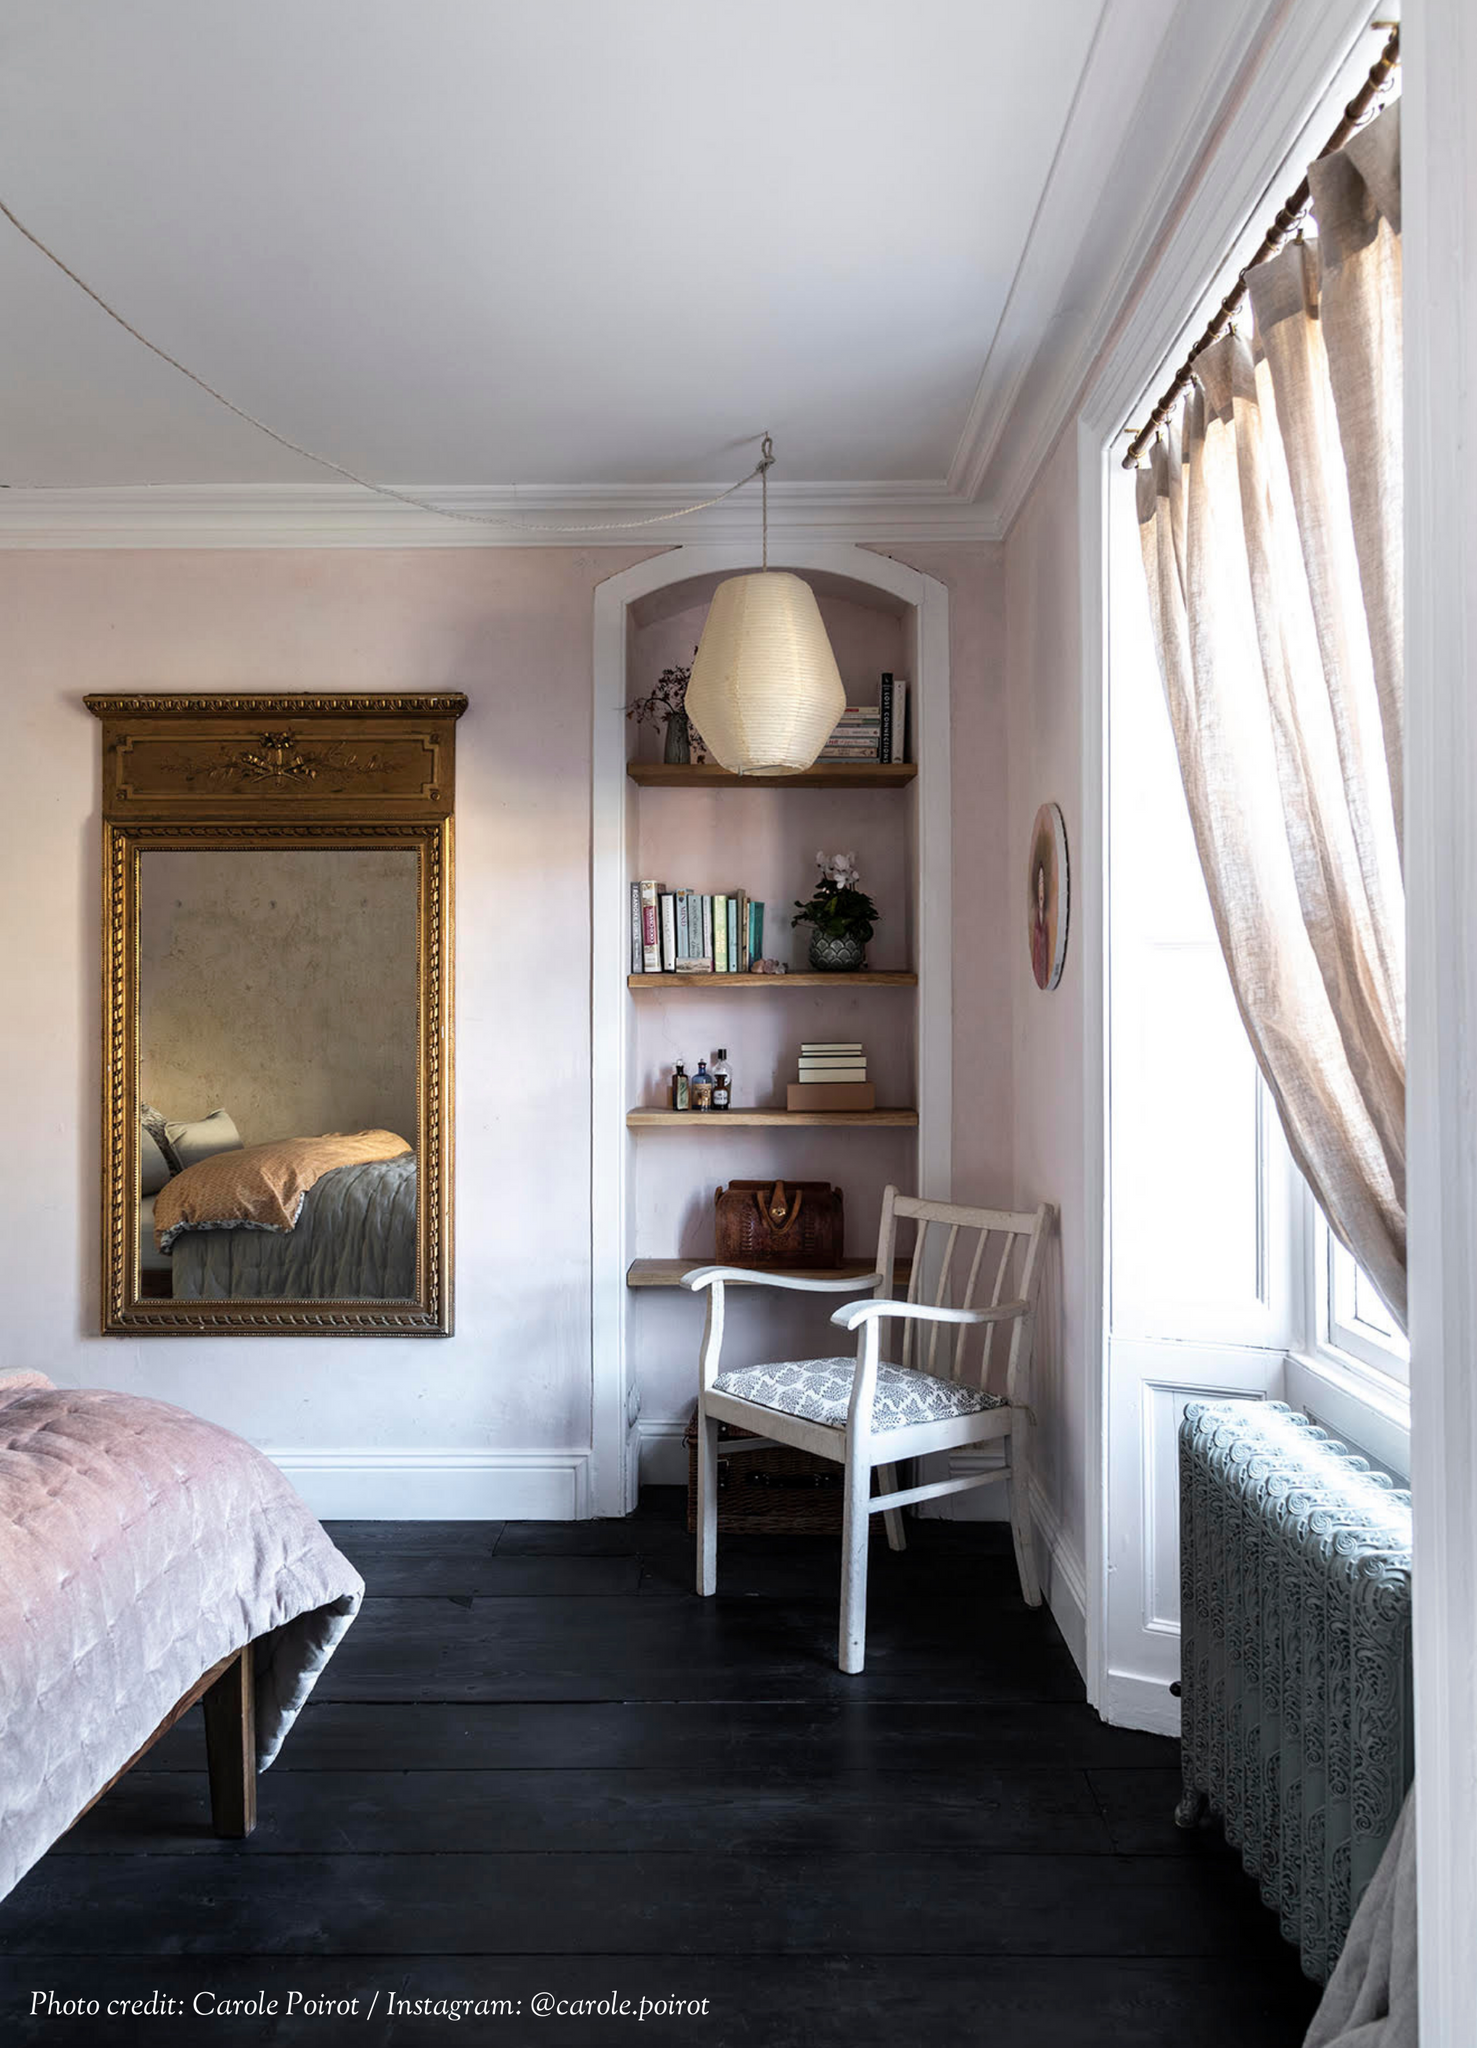 The French House Blog - 6 ways to add French style to your home